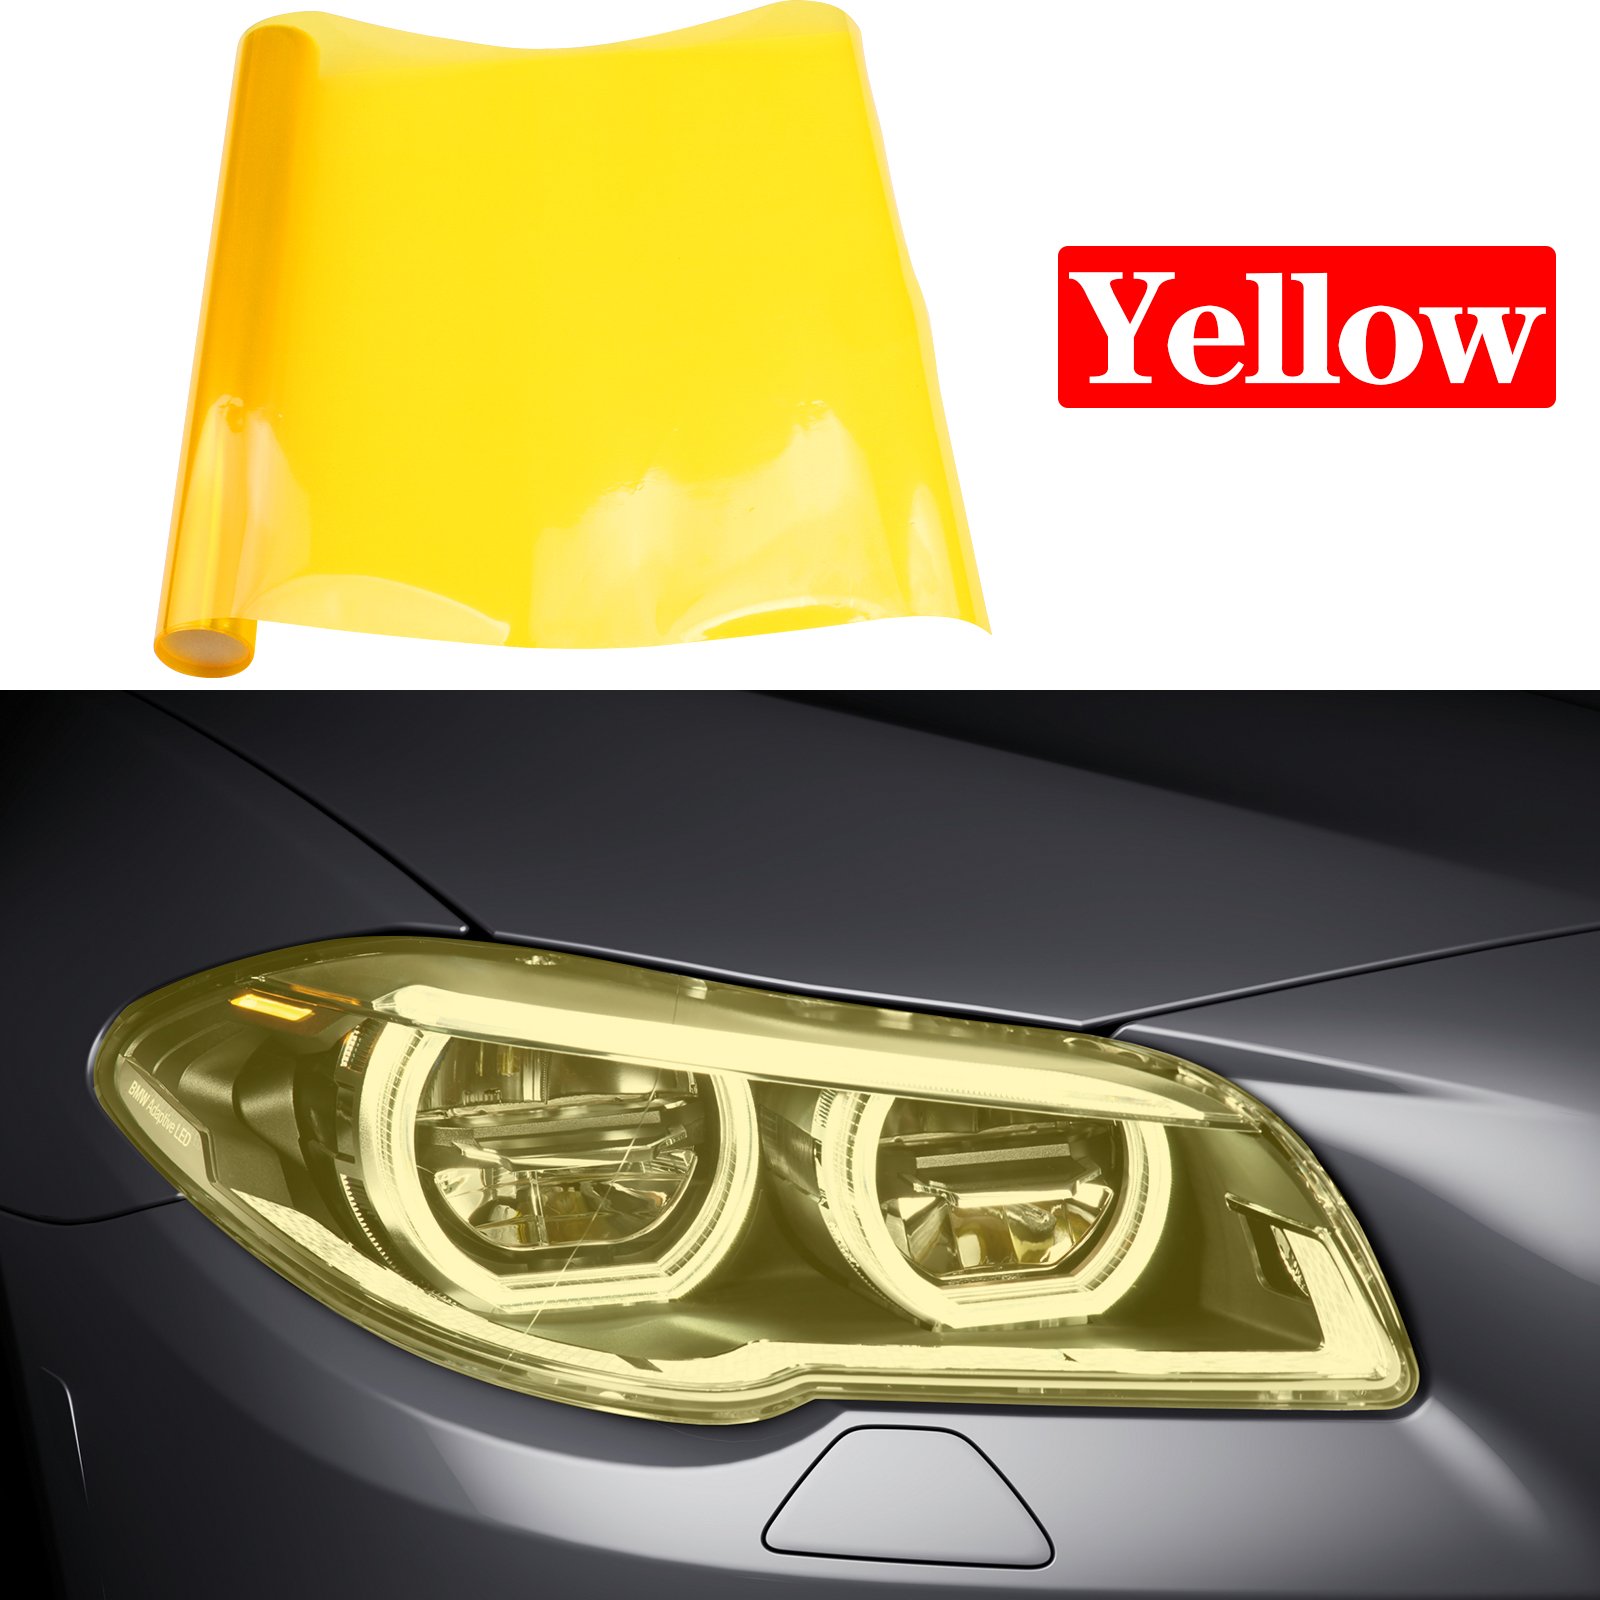 Auto Headlight Taillight Stickers Wrap Sheet Film Cover Car Exterior Accessories 30cm60cm Yellow 